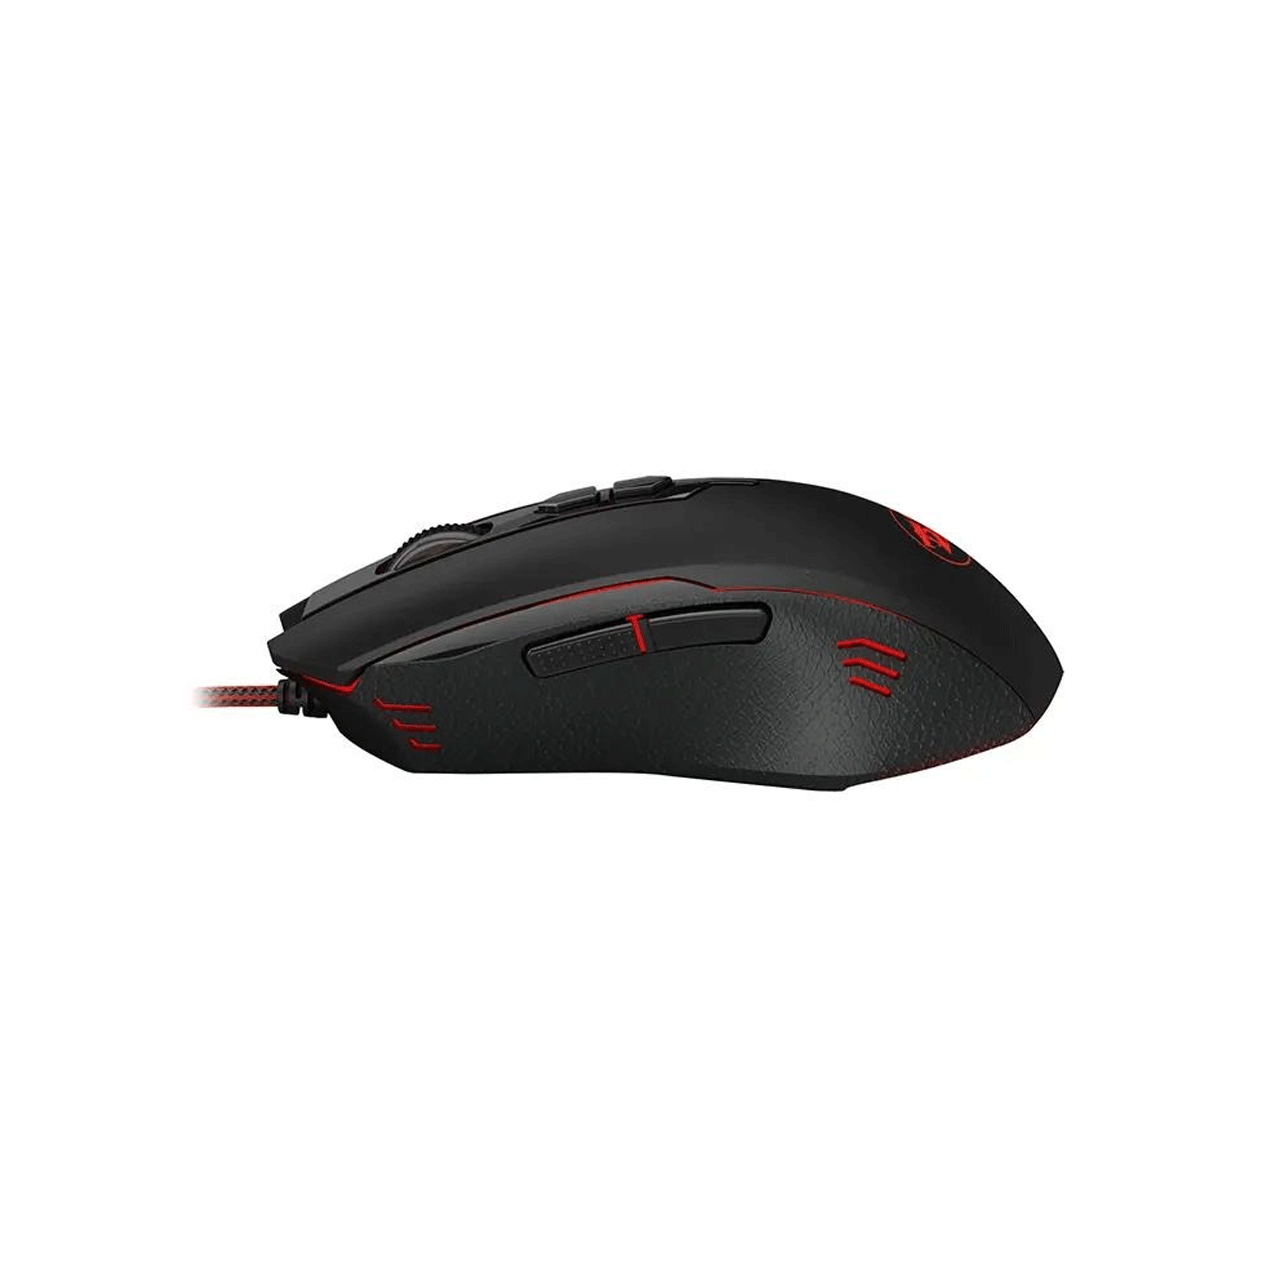 M716A-Inquisitor-21-gaming-redragon-mouse